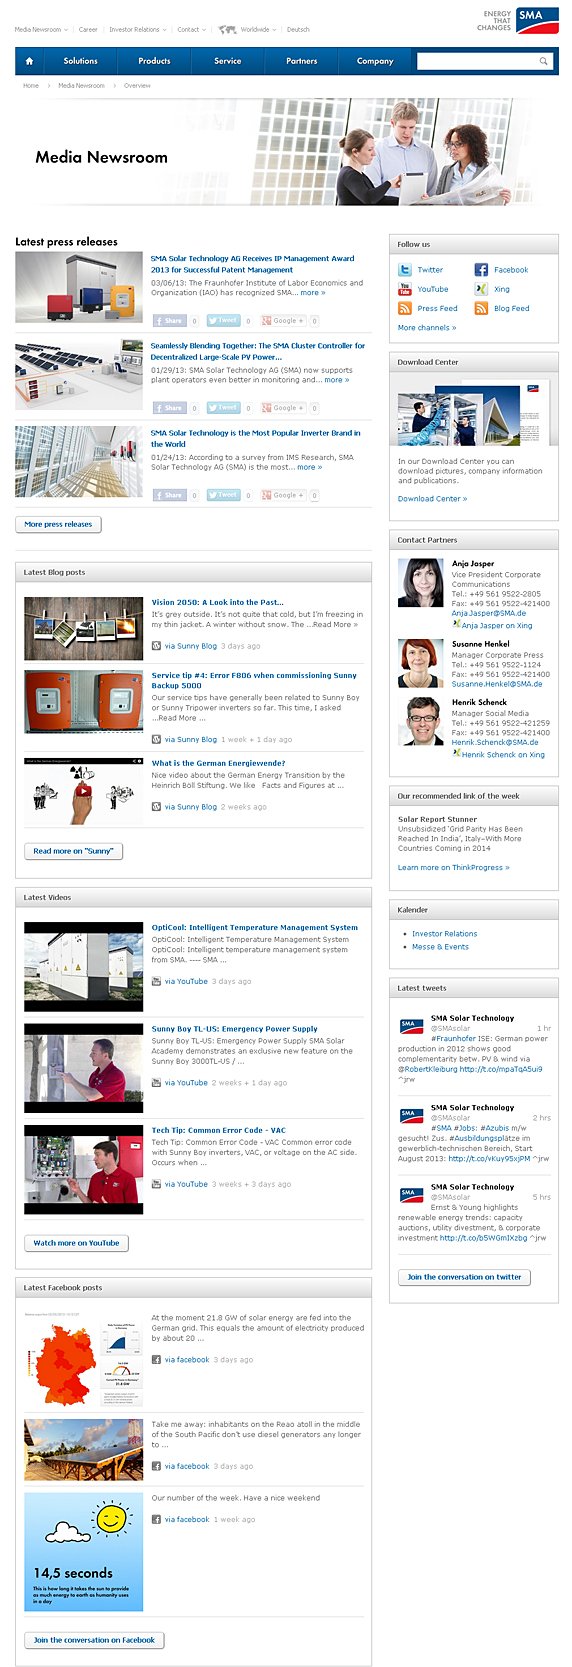 All SMA publications gathered on one page: SMA's Media Newsroom